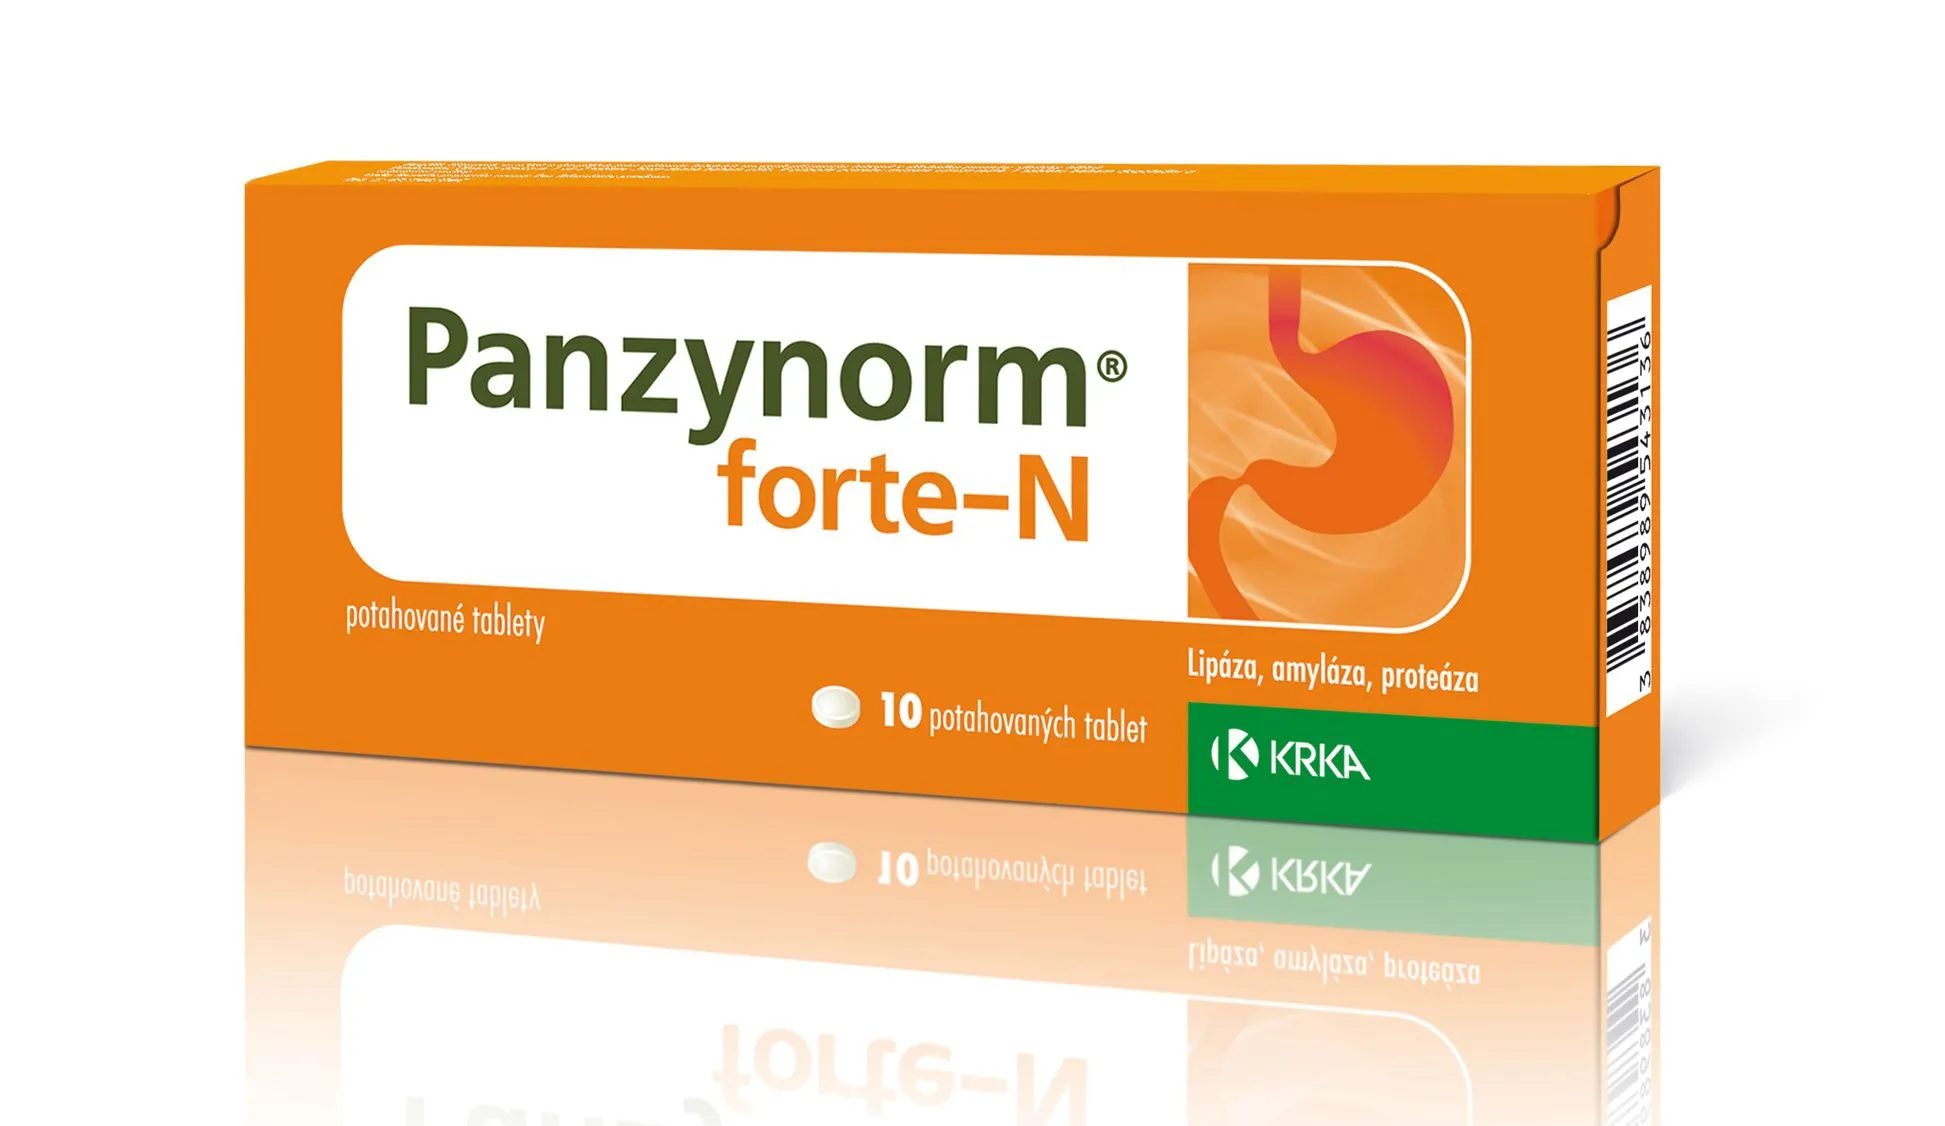 Panzynorm forte-N 10 tablet